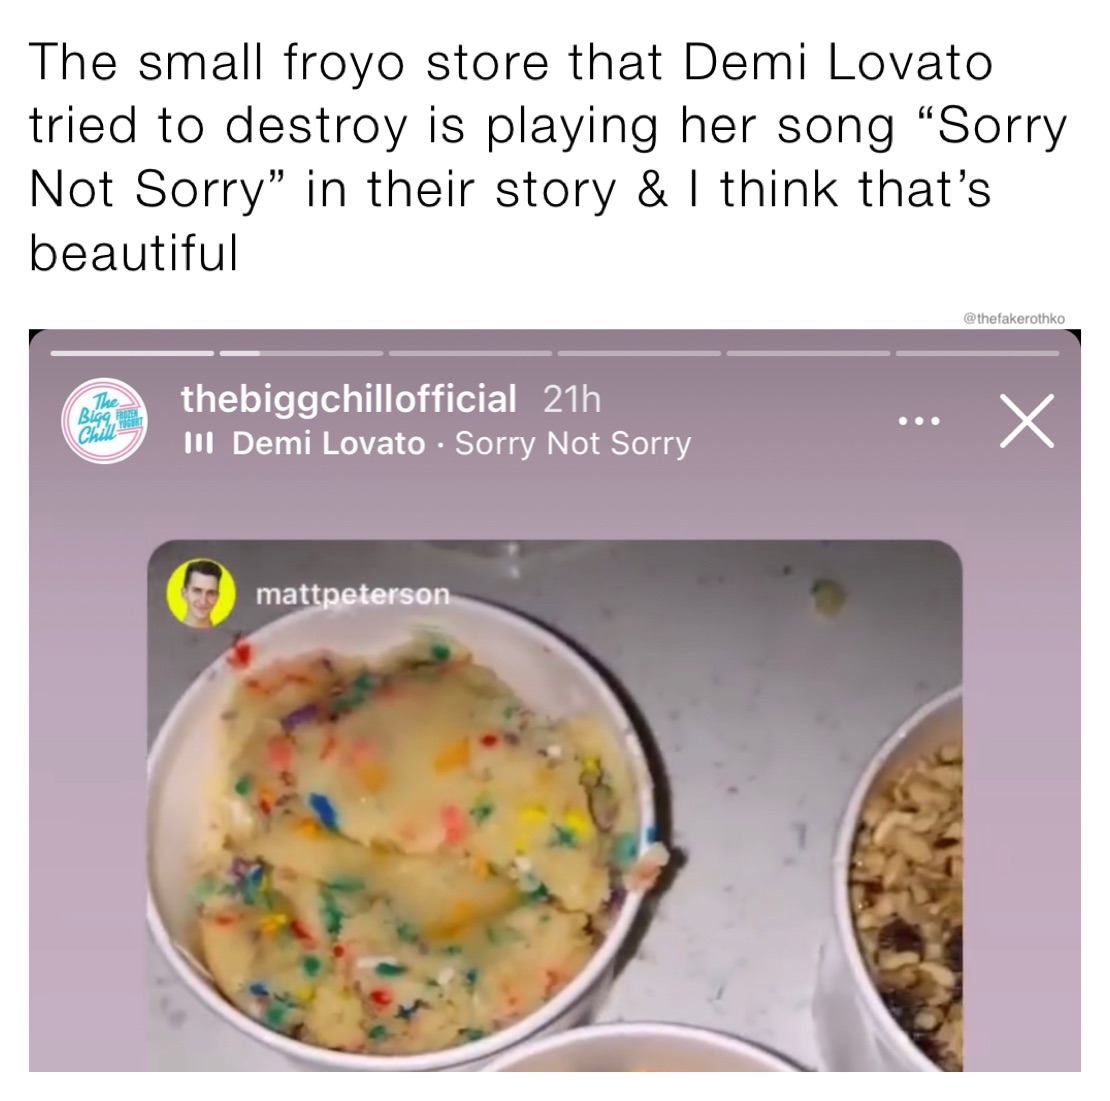 The small froyo store that Demi Lovato tried to destroy is playing her song “Sorry Not Sorry” in their story & I think that’s beautiful